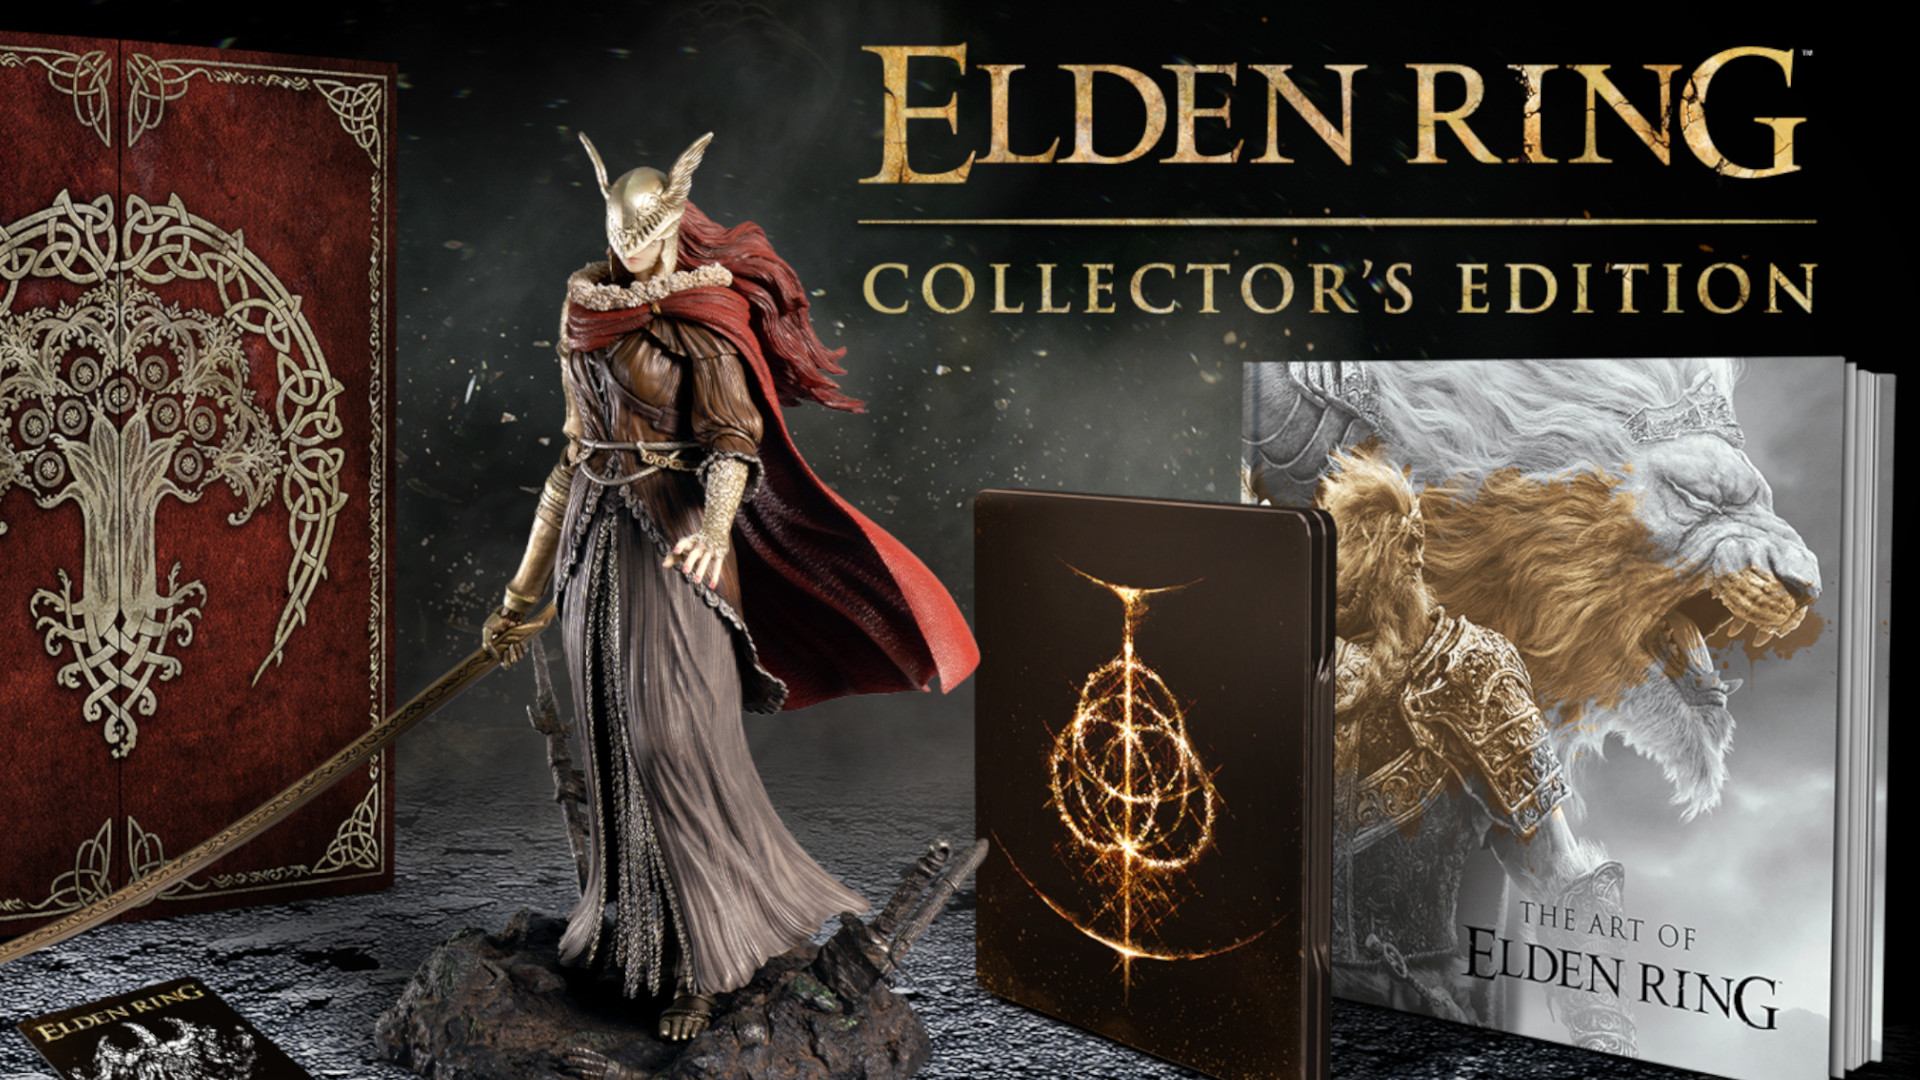 Elden Ring PC System Requirements Revealed Ahead of February 25 Release